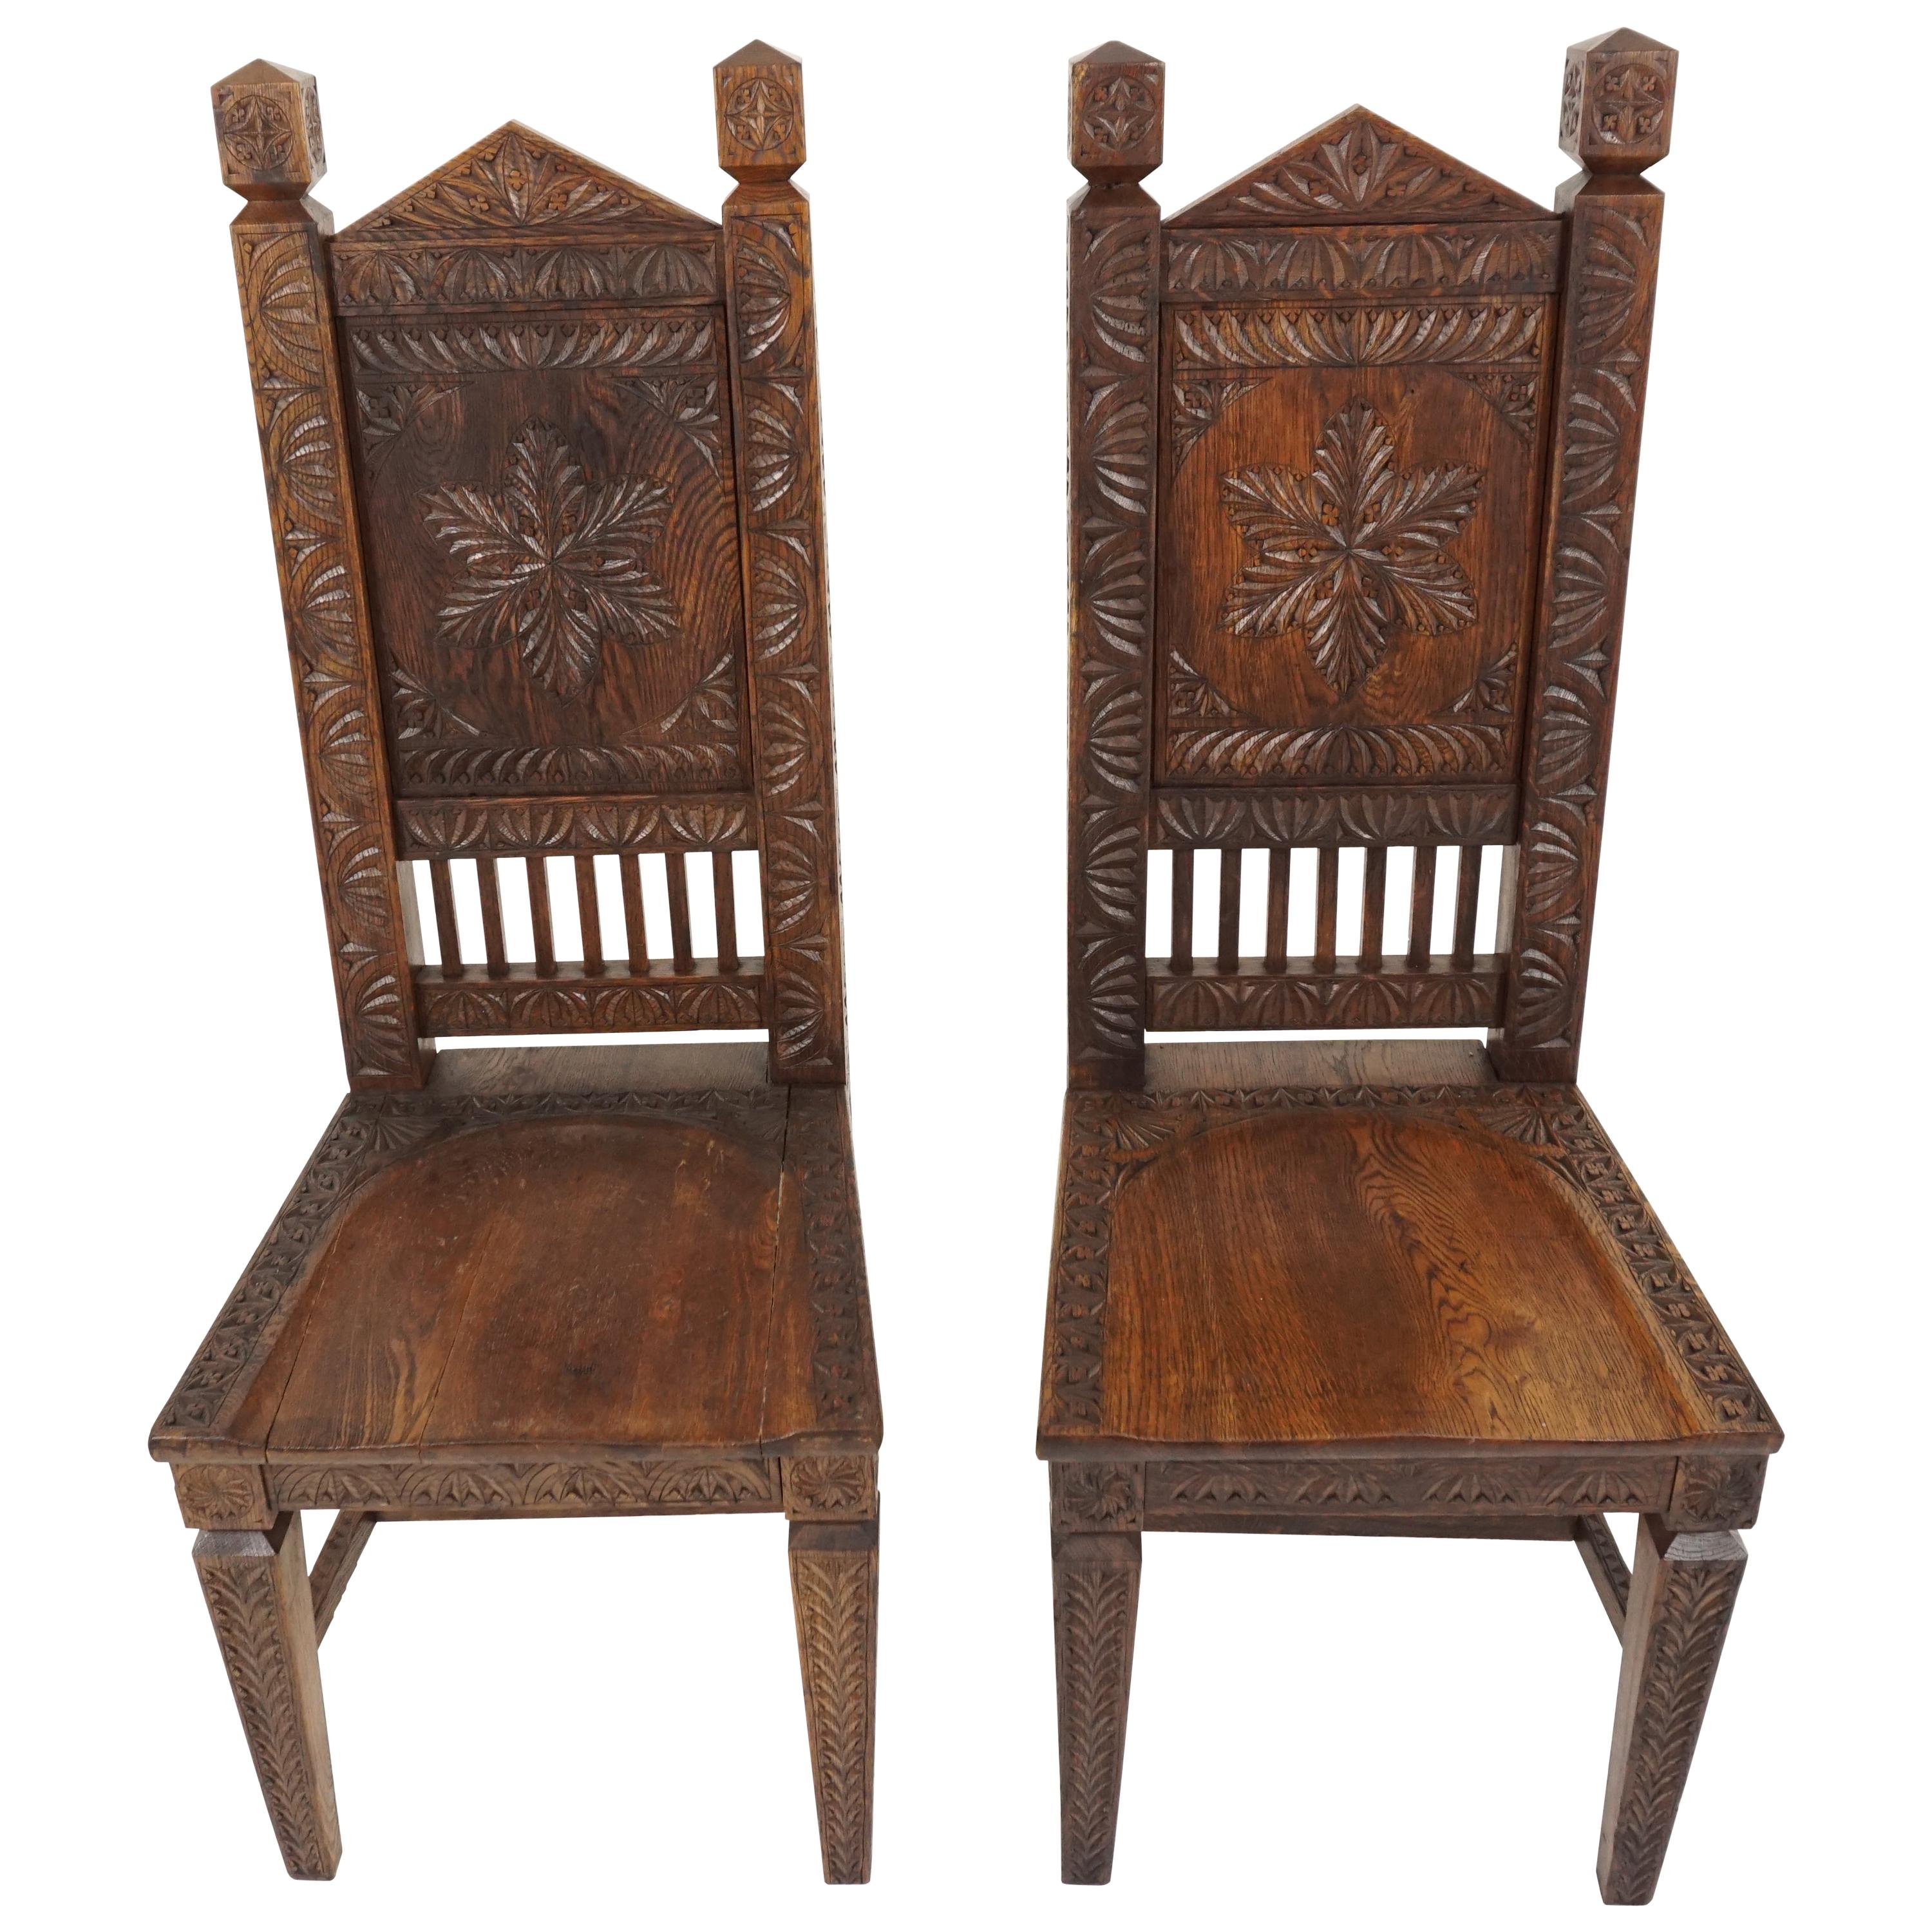 Pair of Antique Oak Chairs, Heavily Carved Hall Chairs, Scotland 1890, B1807